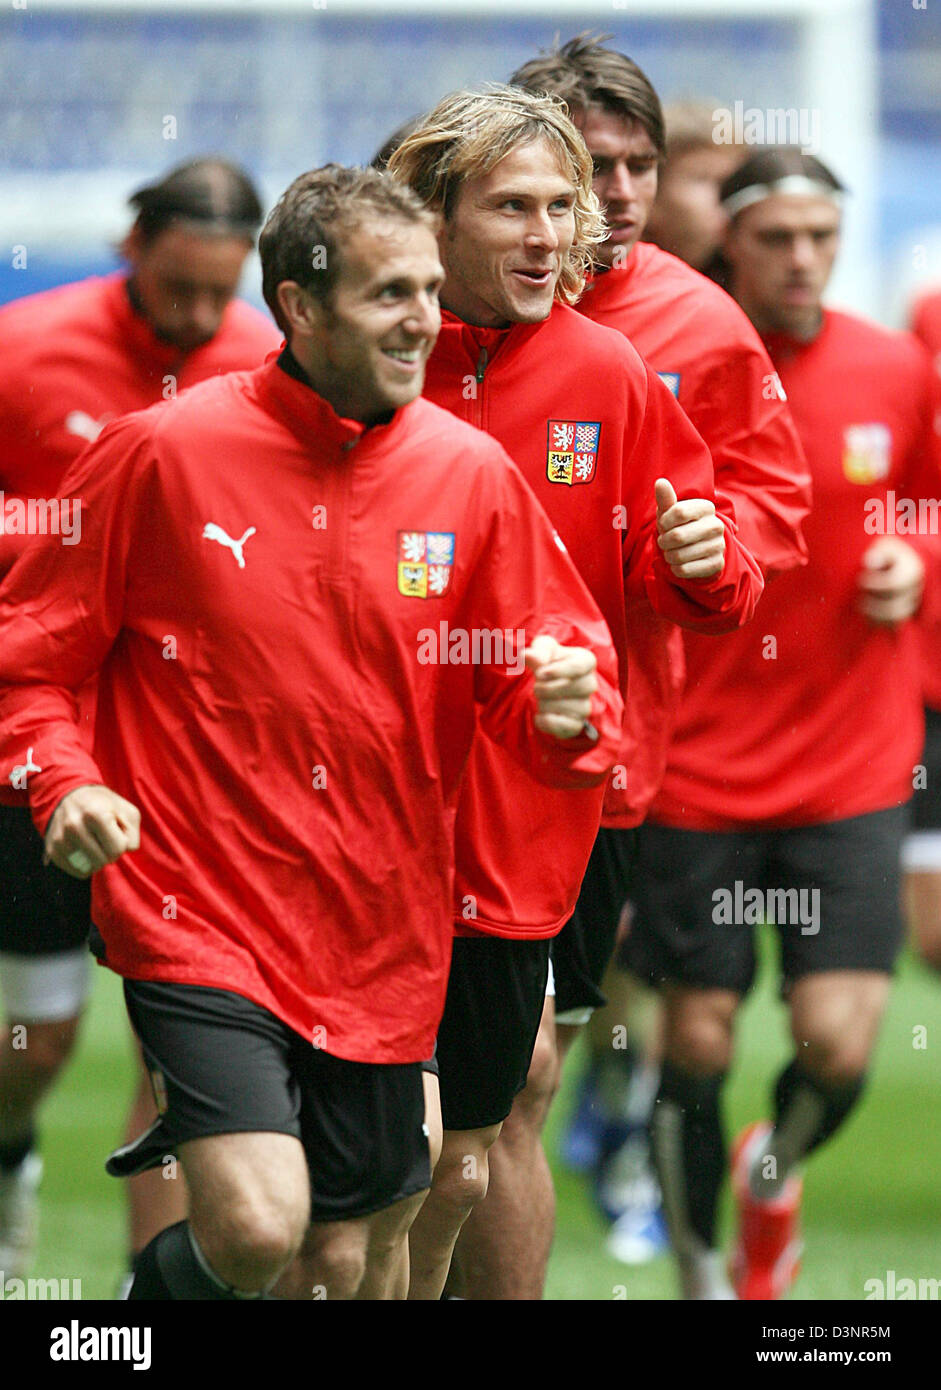 Czech player Pavel Nedved (C) during a training session of the Czech Republic soccer team in Hamburg, Germany, Wednesday 21 June 2006. The Czech Republic will face Italy in their third FIFA World Cup group match in Hamburg on Thursday 22 June. DPA/MAURIZIO GAMBARINI Stock Photo